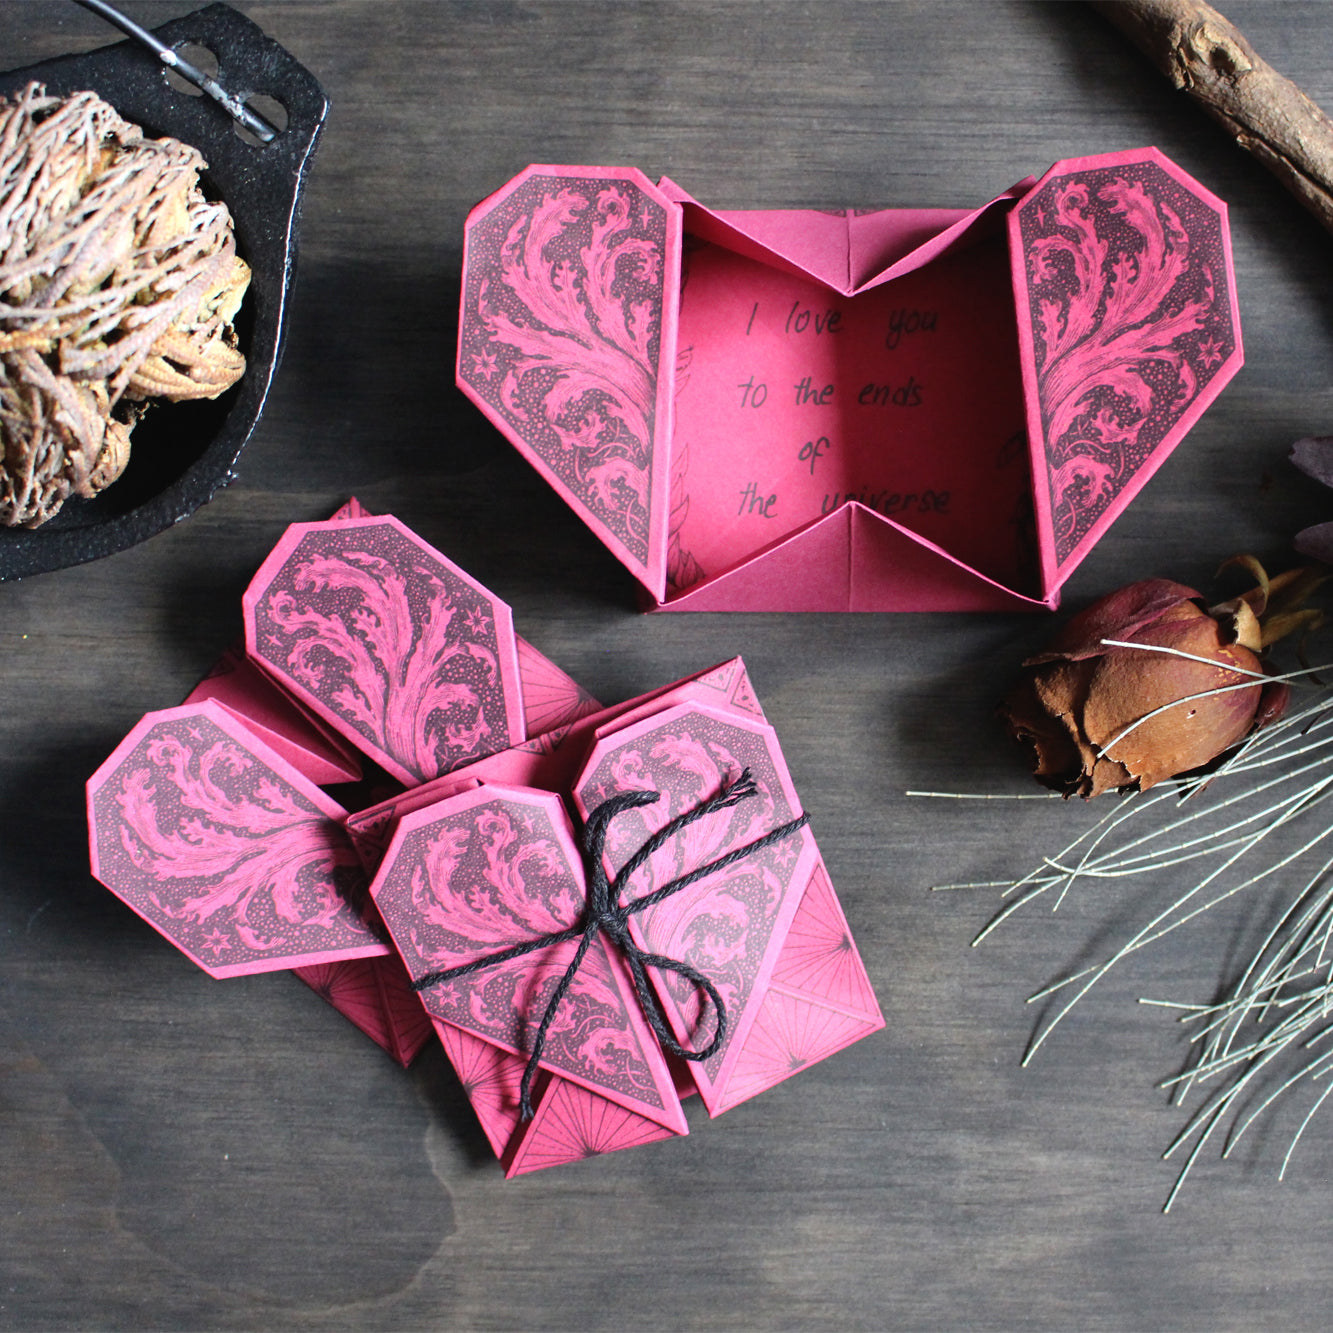 Origami Secret Hearts printed on red paper placed on dark wood backrgound. 